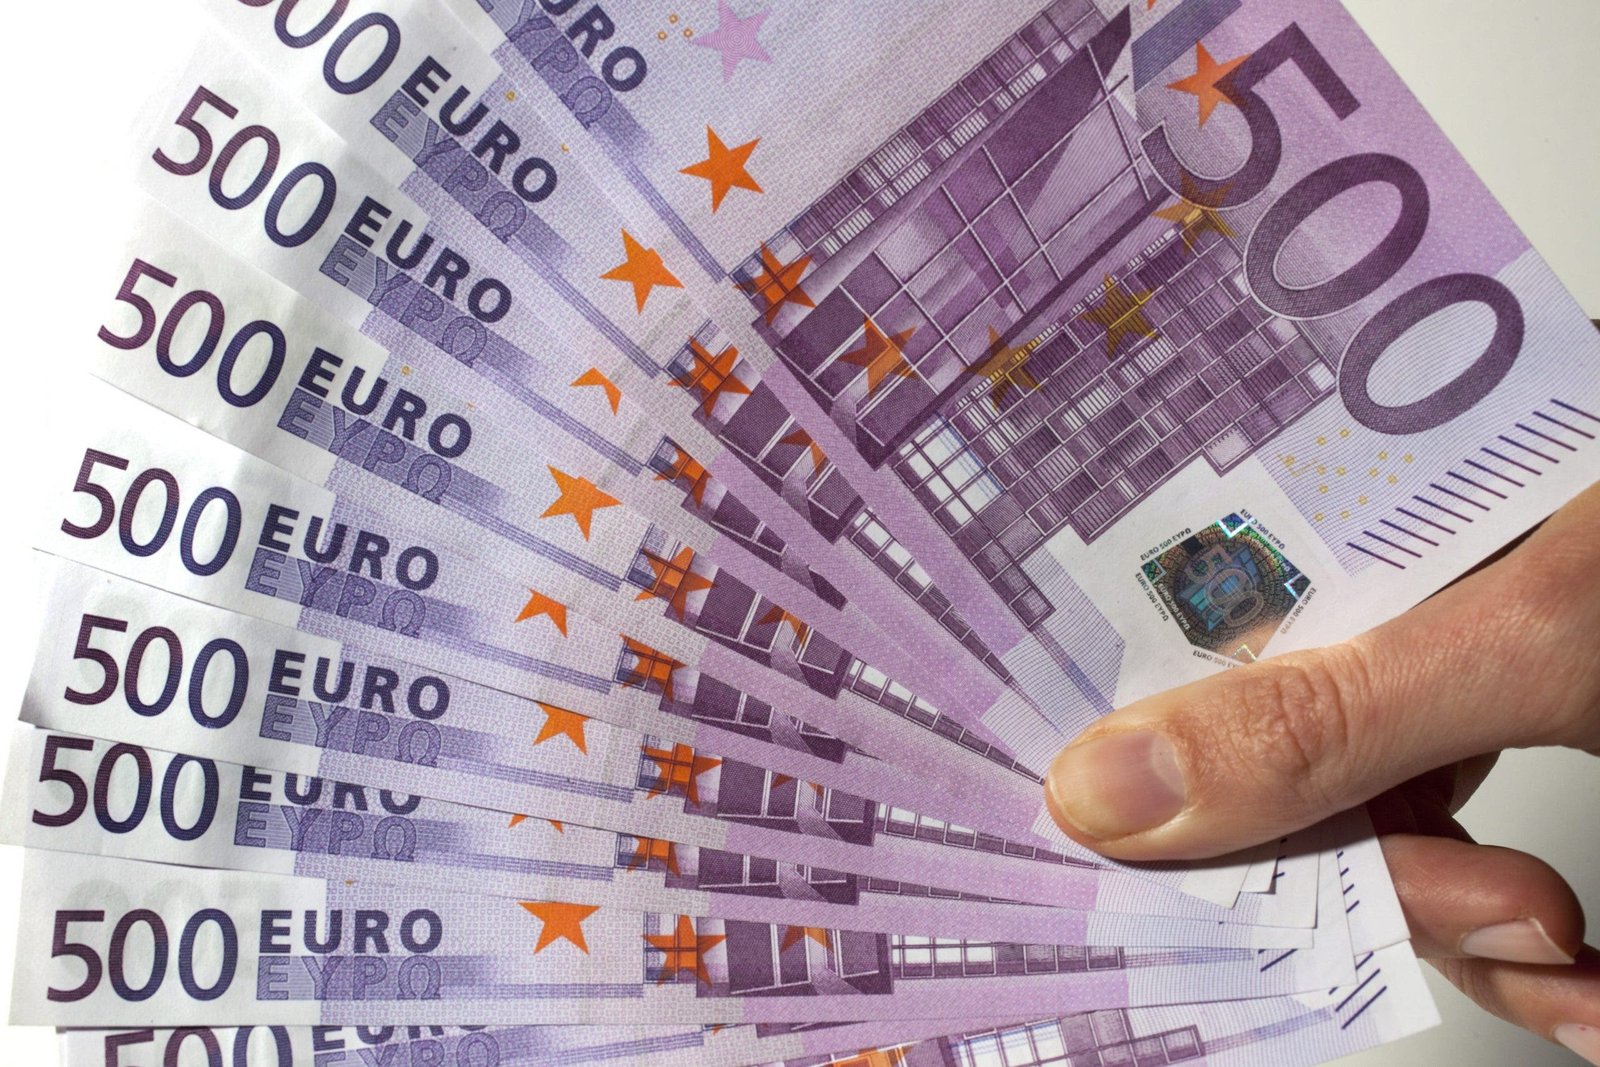 Unbelievable! Marbella, Spain Busts Operation Dealing in Flawless Fake Currency! - 500 euro note scaled 1 - Marbella News Crime -